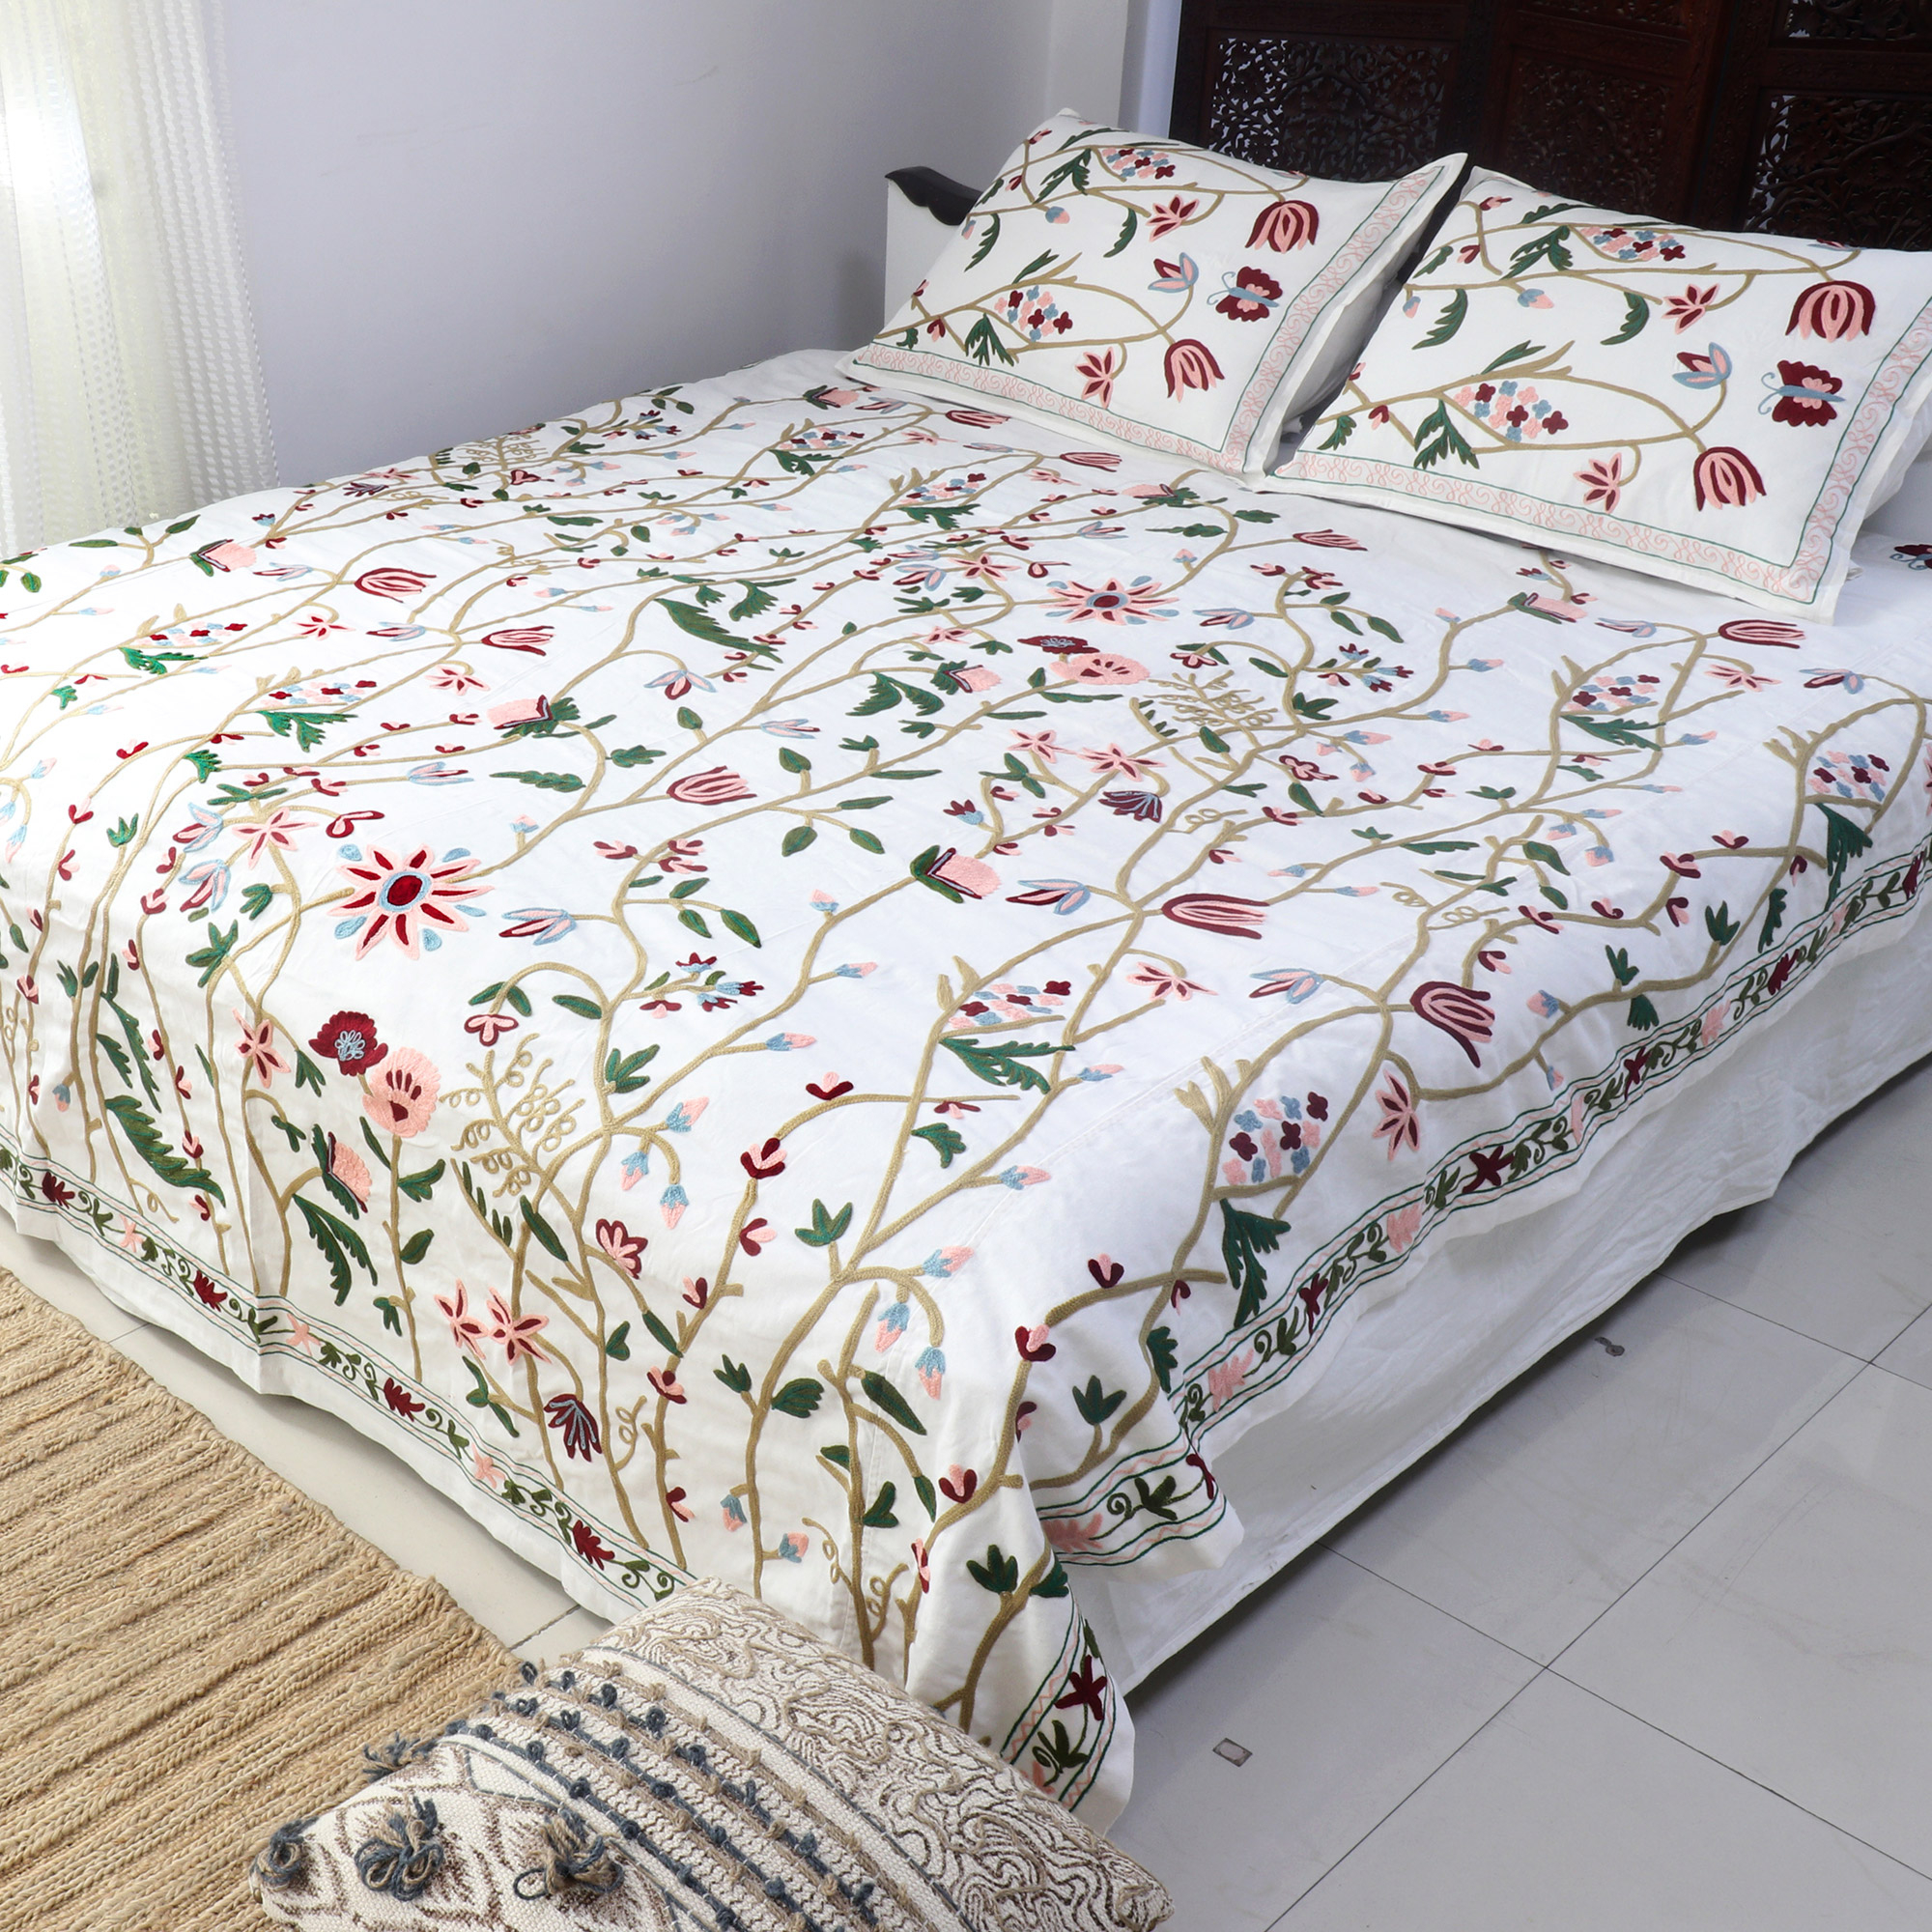 Buy King / Queen / Twin White Bed Runner With Decorative Throw Pillow  Cover, Cotton Fern Embroidery Pearls, Modern Contemporary Fern Blossom  Online in India 